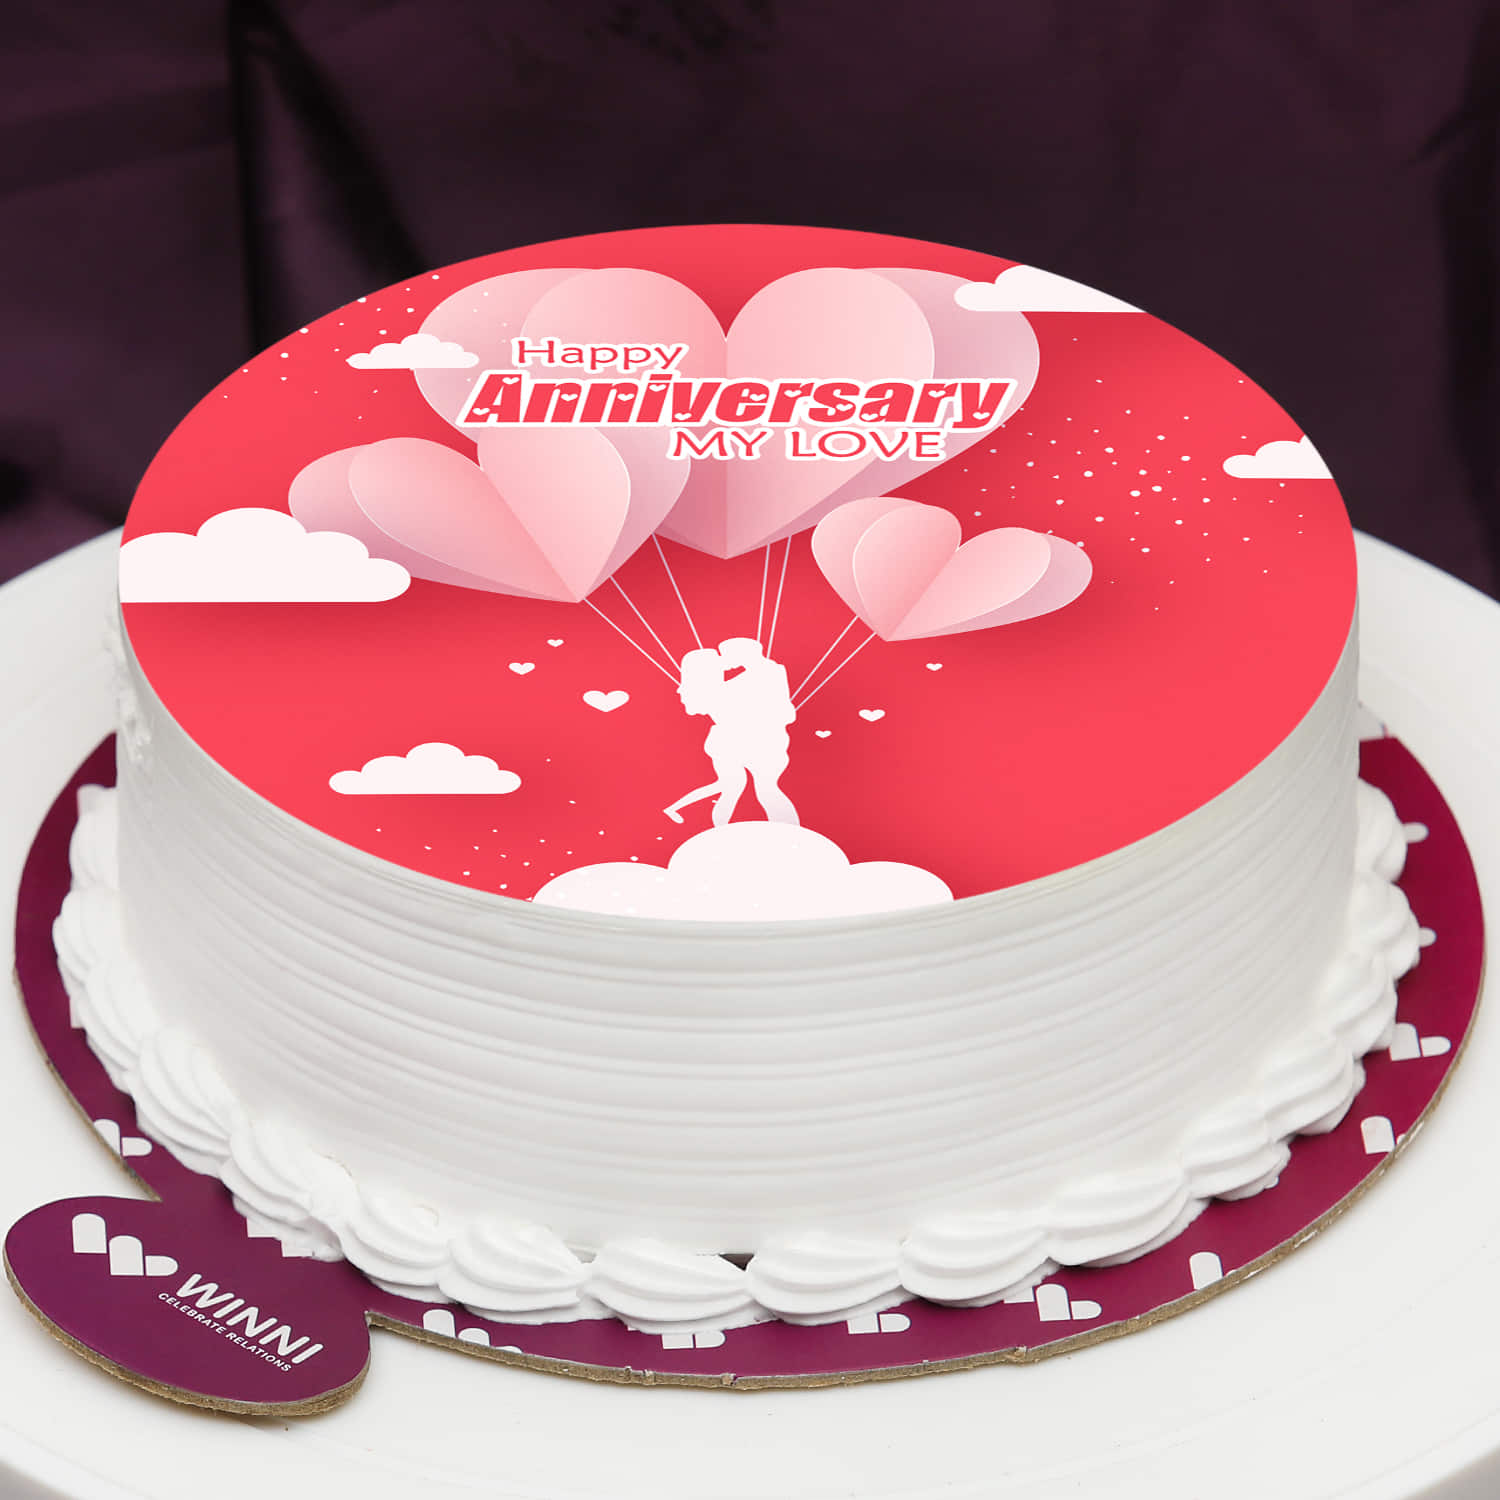 Best 1 Kg Anniversary Cake by Cake Square Chennai |Order Cakes Online | Mid  Night Delivery Available - Cake Square Chennai | Cake Shop in Chennai